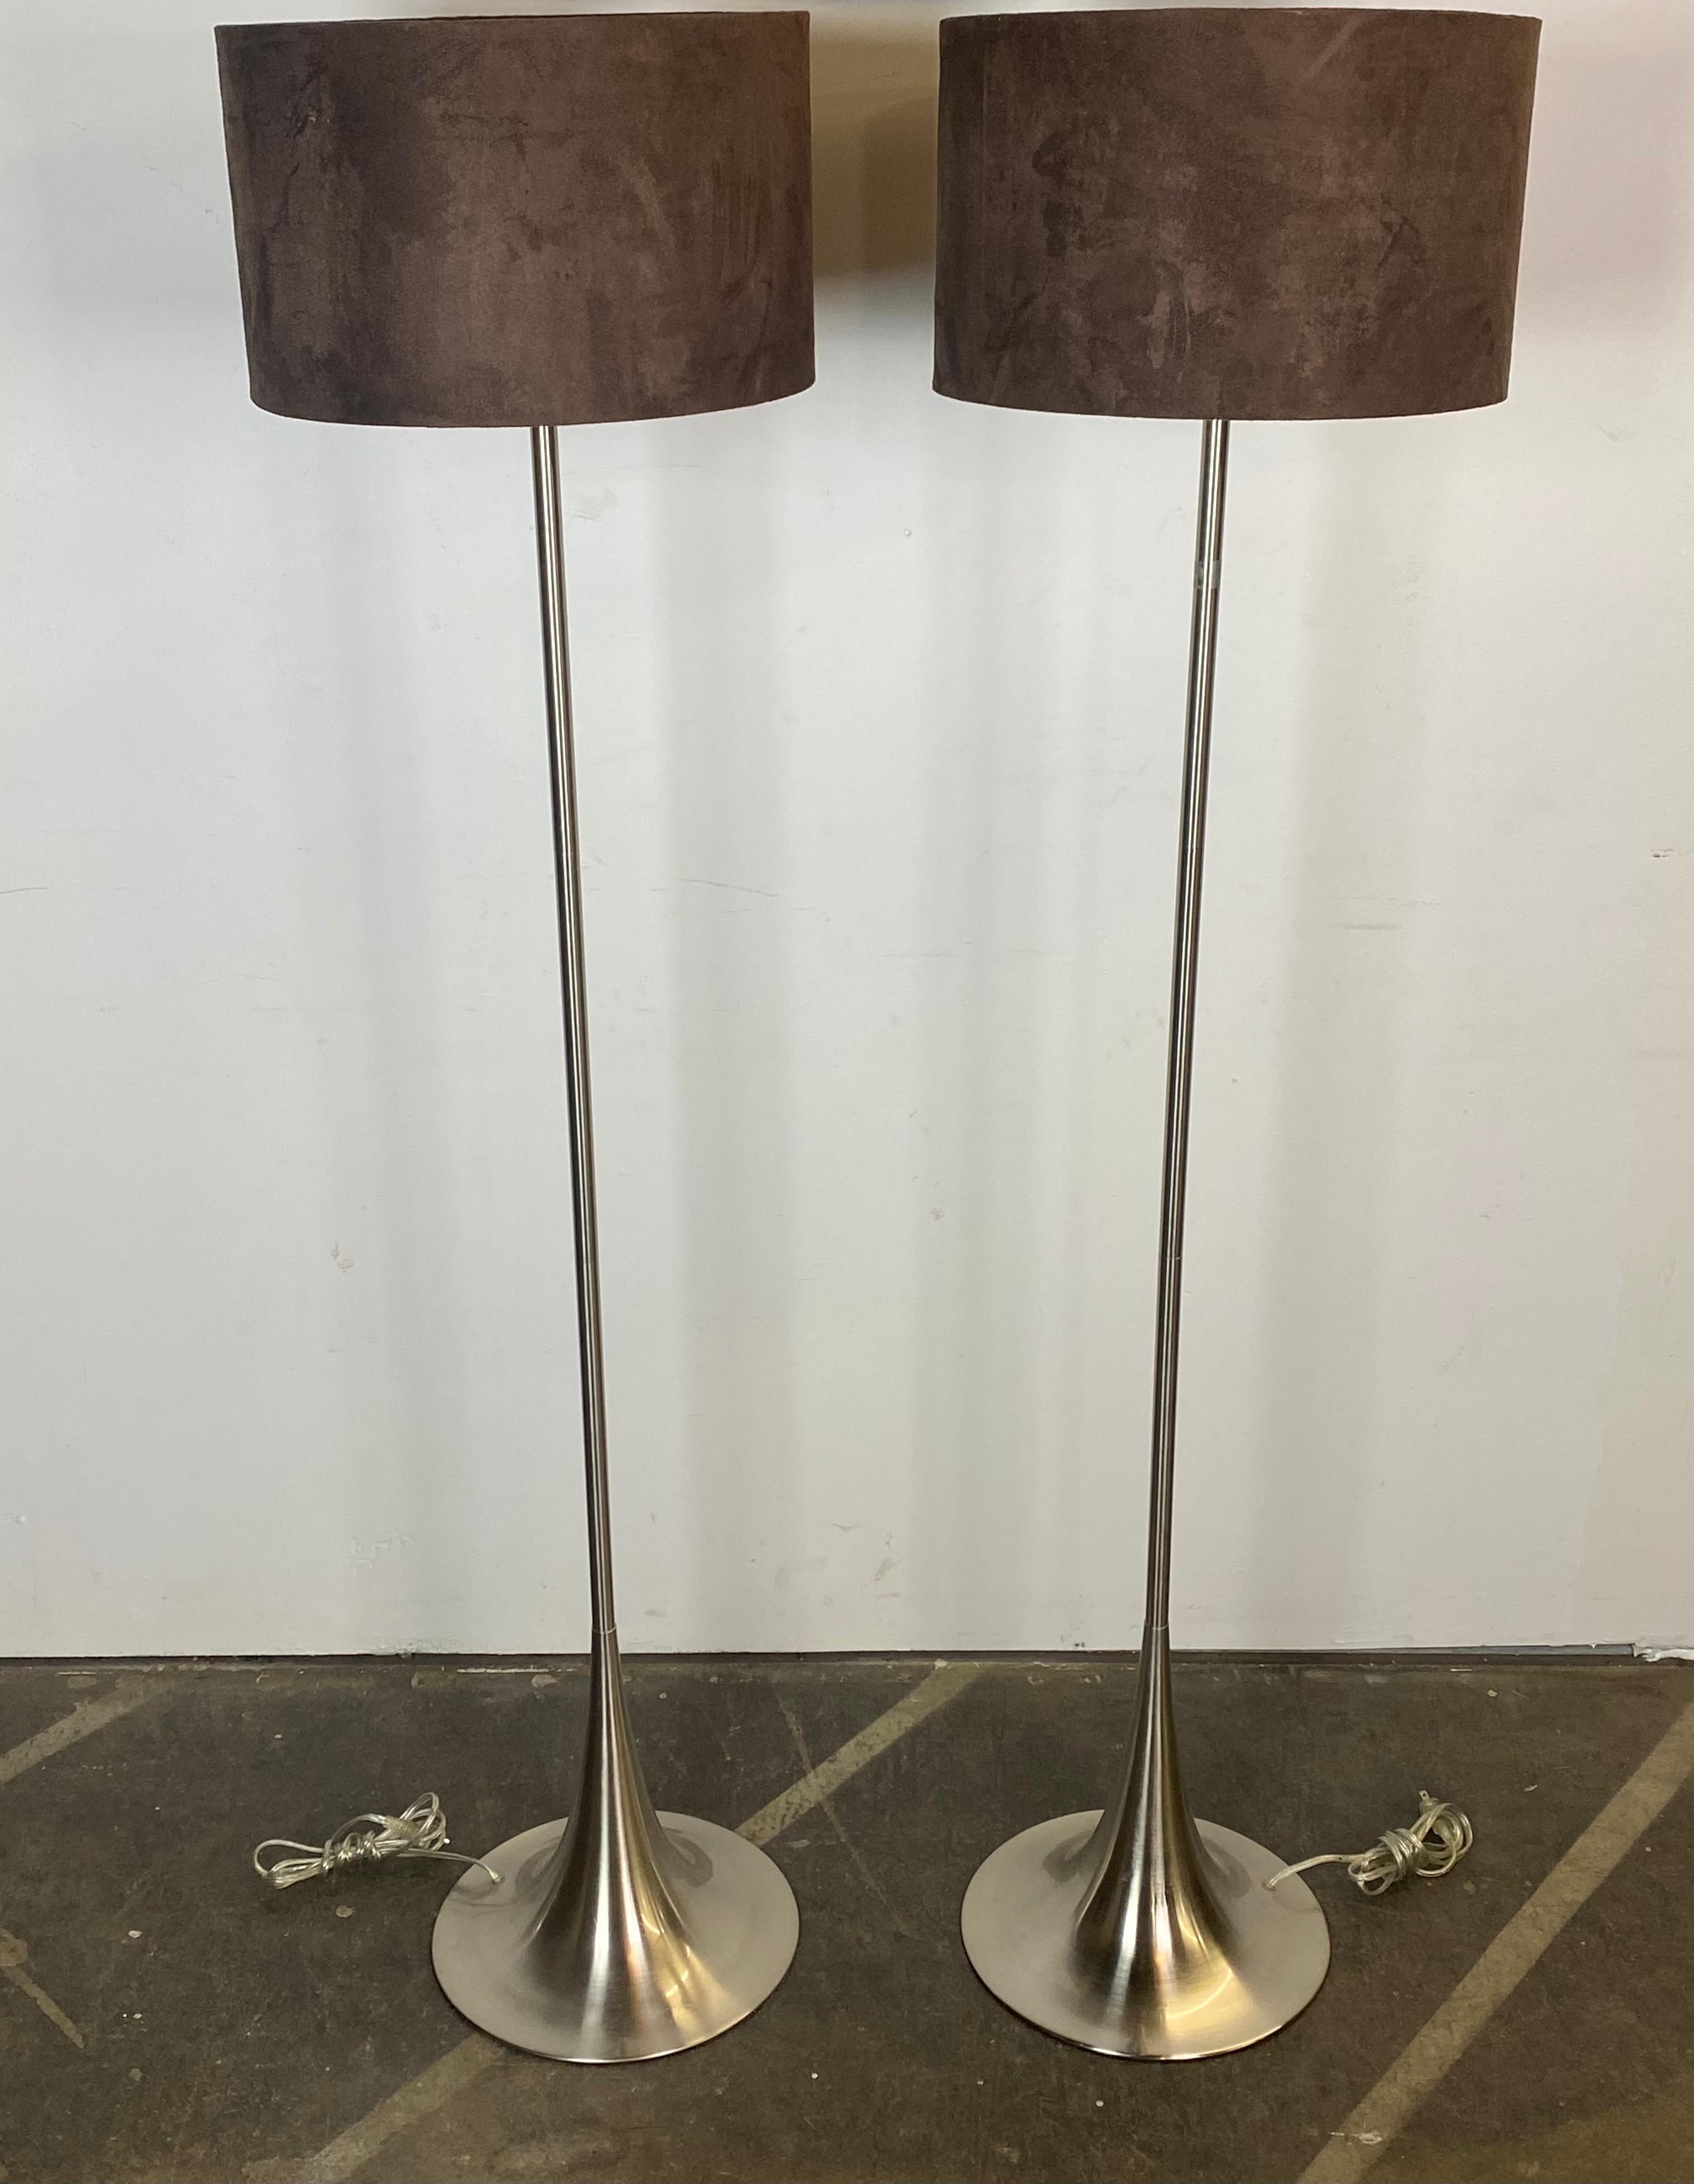 Chic Mid-Century Modern style floor lamps. Evocative of Eero Saarinen’s tulip design and also Laurel Lamp Company’s similar floor lamp design. Featuring matching suede shades. Tested and working. In very good condition.